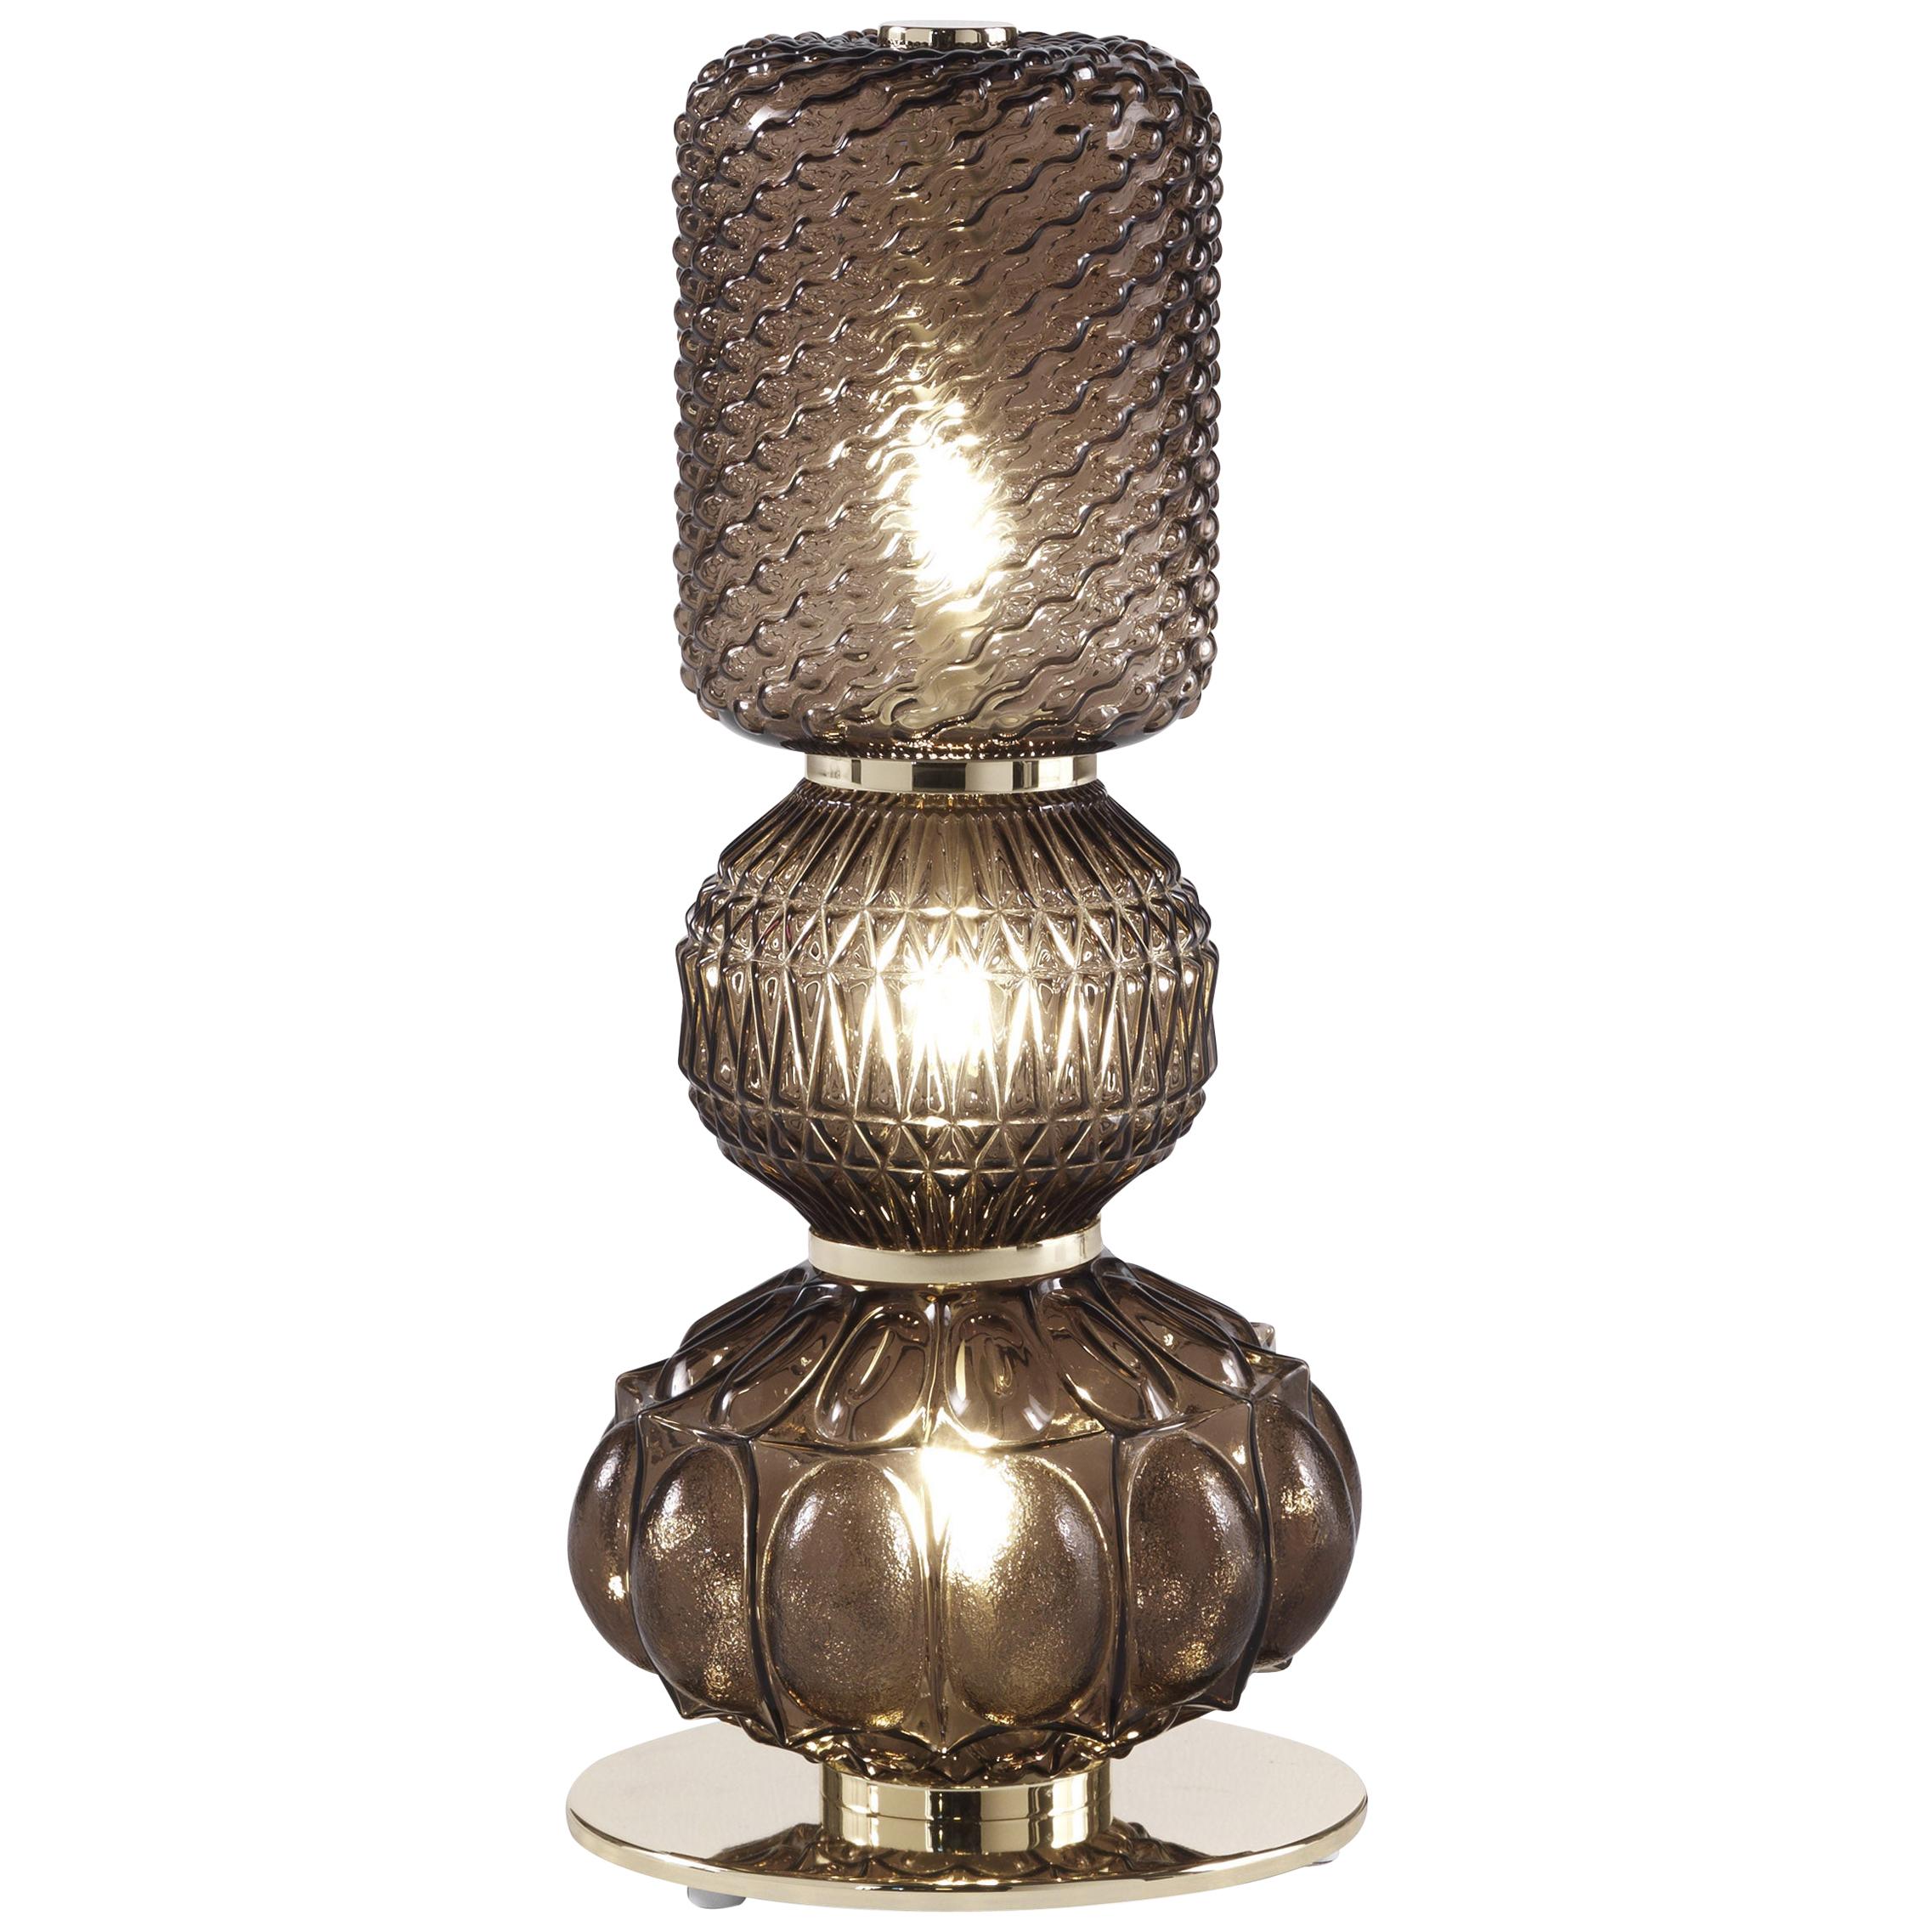 21st Century Chagall Table Lamp in Metal and Glass by Etro Home Interiors